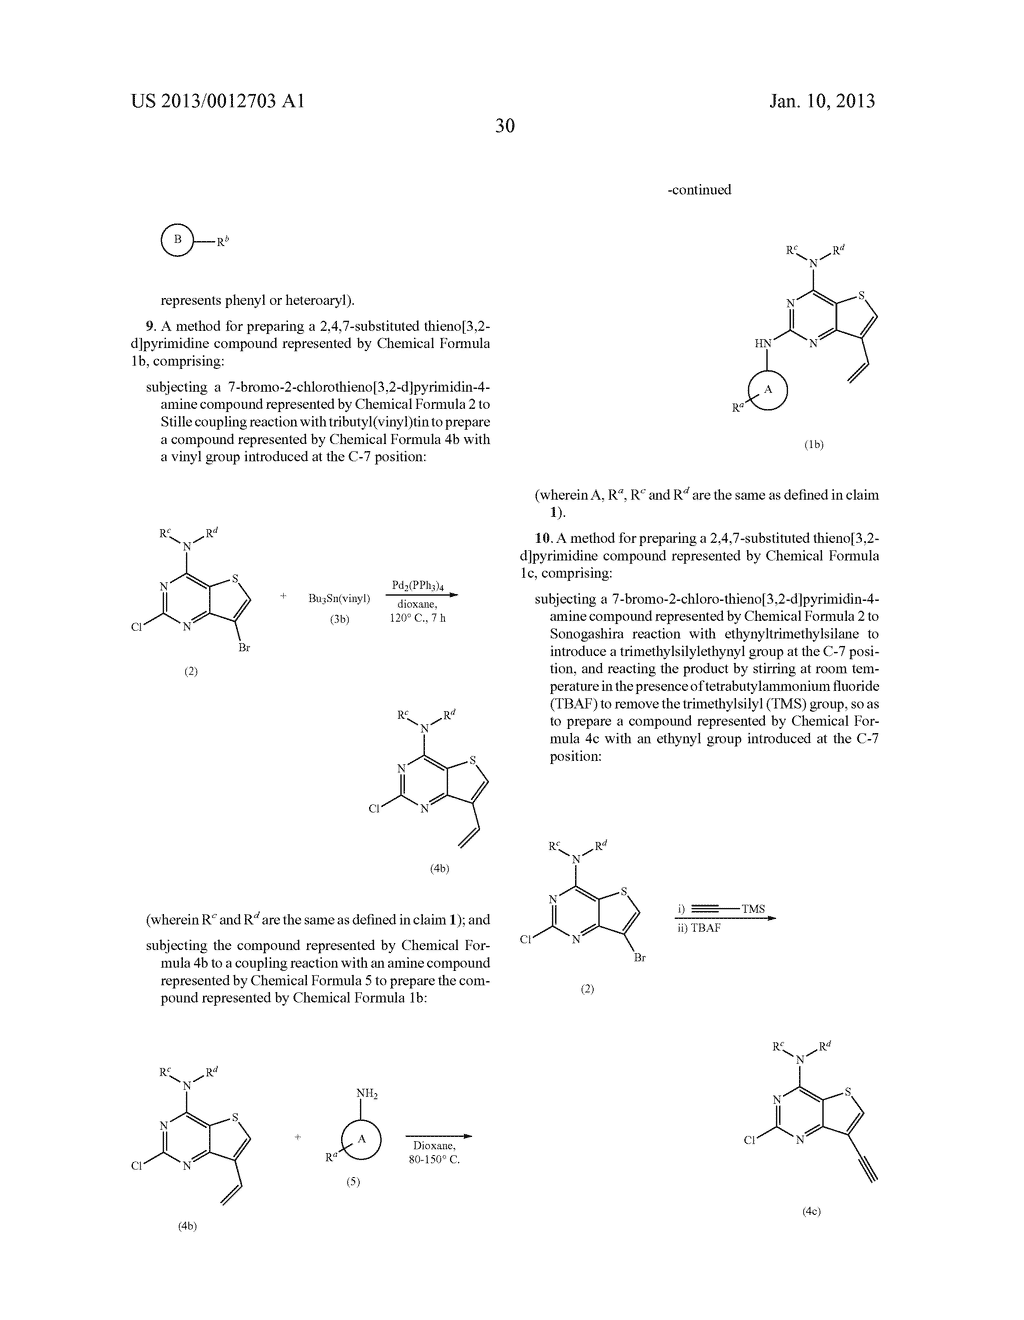 2,4,7-SUBSTITUTED THIENO[3,2-D]PYRIMIDINE COMPOUNDS AS PROTEIN KINASE     INHIBITORS - diagram, schematic, and image 31